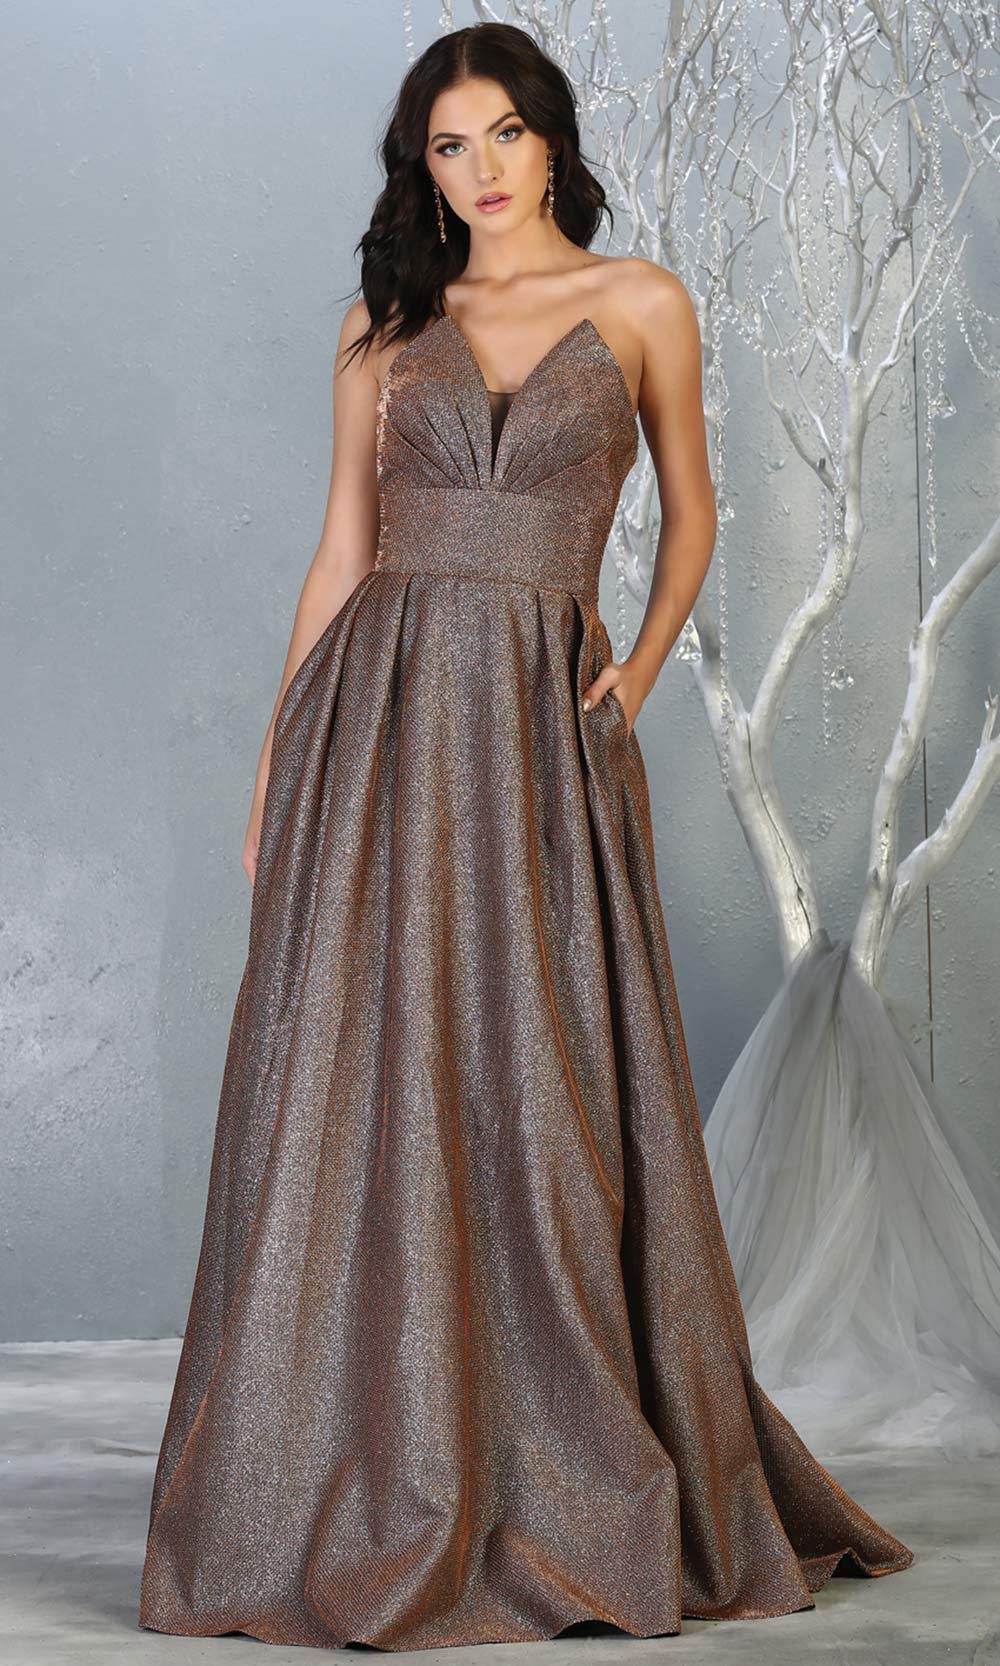 Mayqueen MQ1710 long Bronze metallic strapless flowy dress with pockets. This metallic a-line semi ballgown is perfect for prom, engagement dress, wedding reception dress, quinceanera, debut, sweet 16, formal wedding guest. Plus sizes are available.jpg